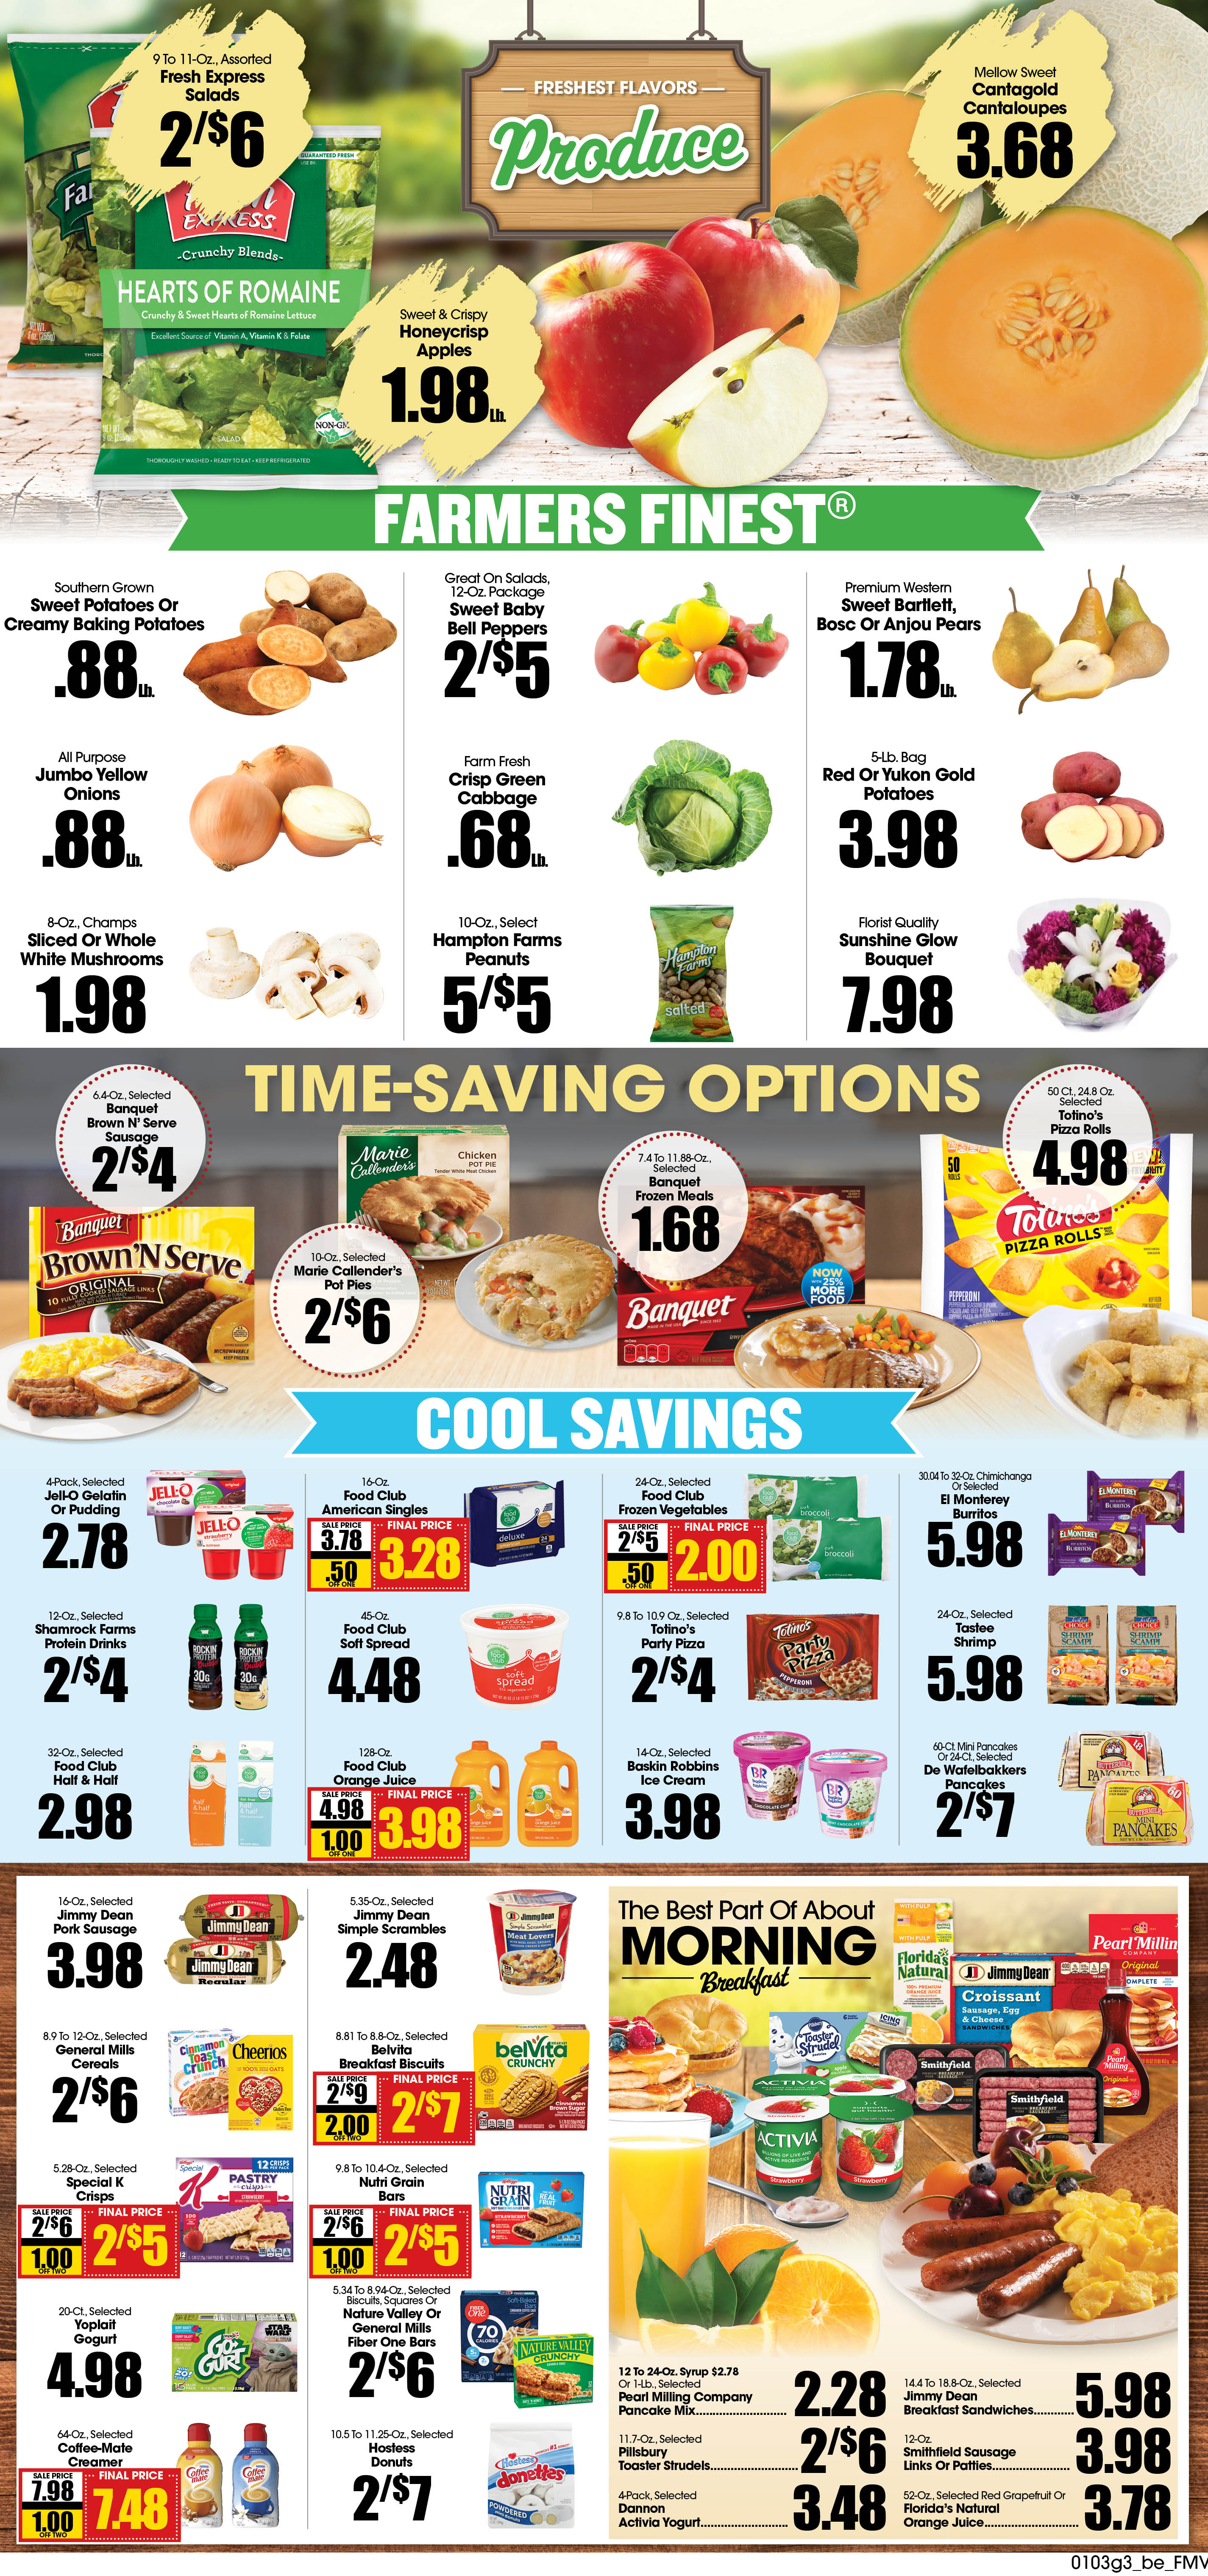 Weekly Ads & Recipes | Bell’s Food Stores